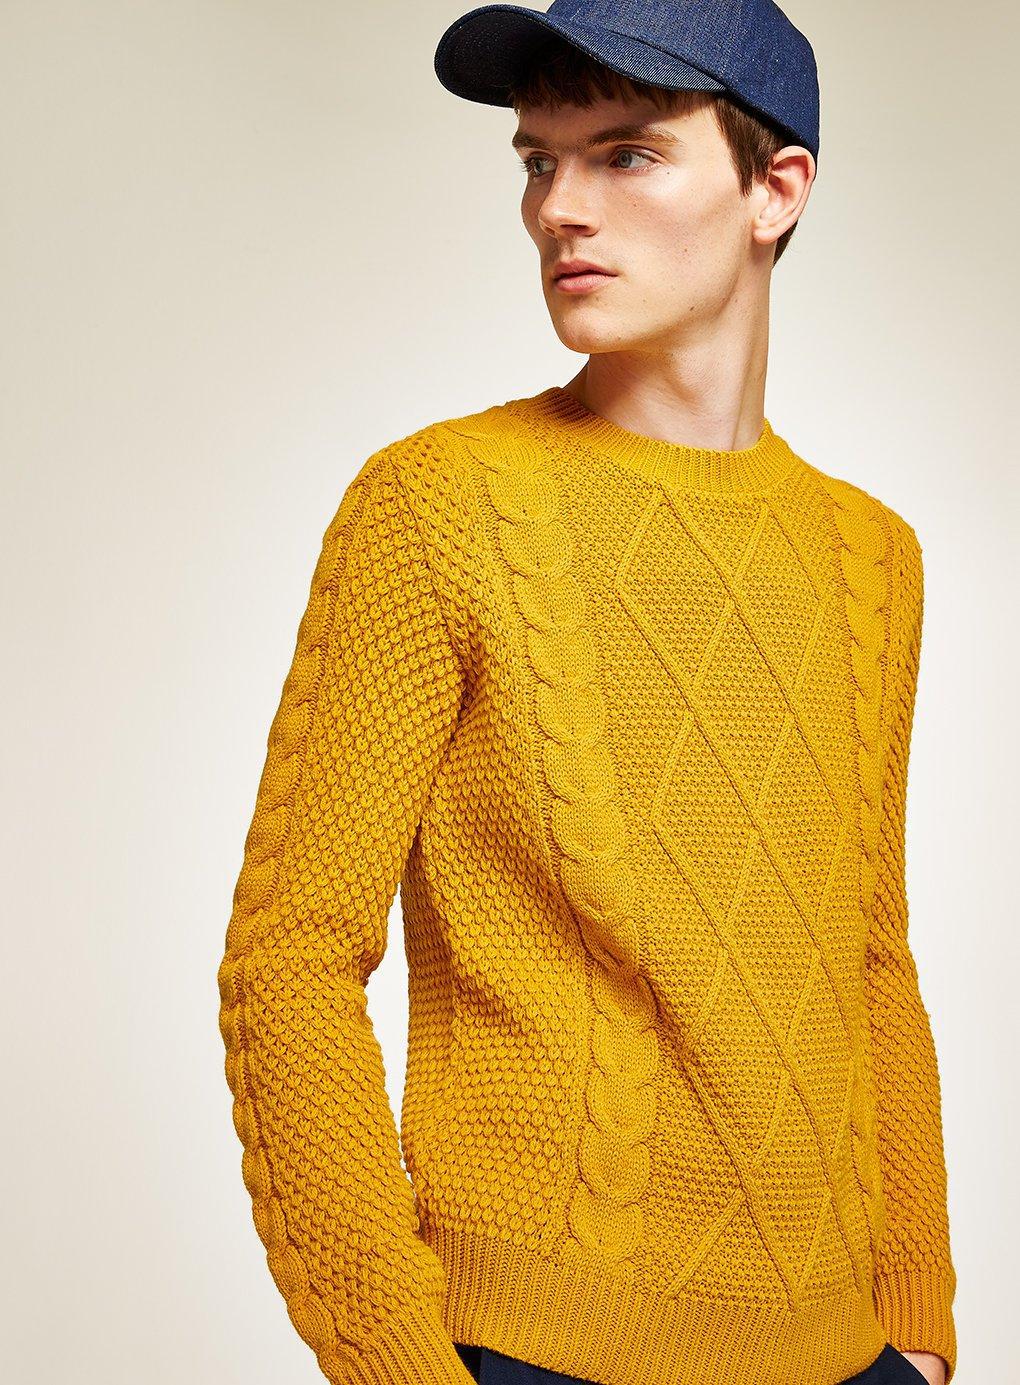 TOPMAN Synthetic Mustard Cable Knit Jumper in Yellow for Men - Lyst